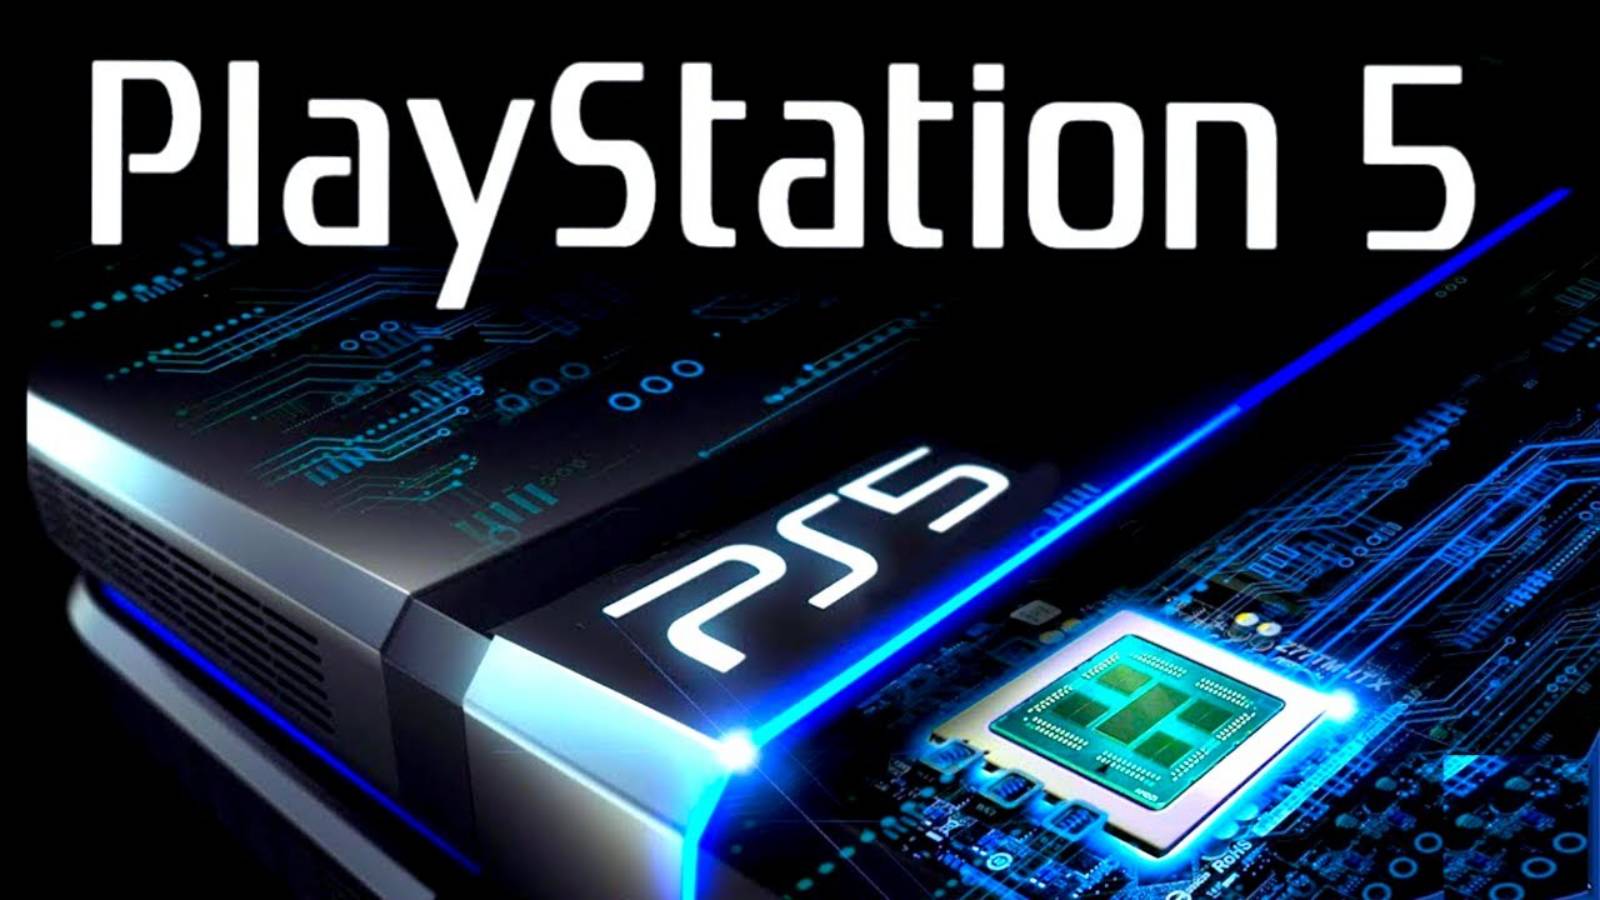 Playstation 5 launch